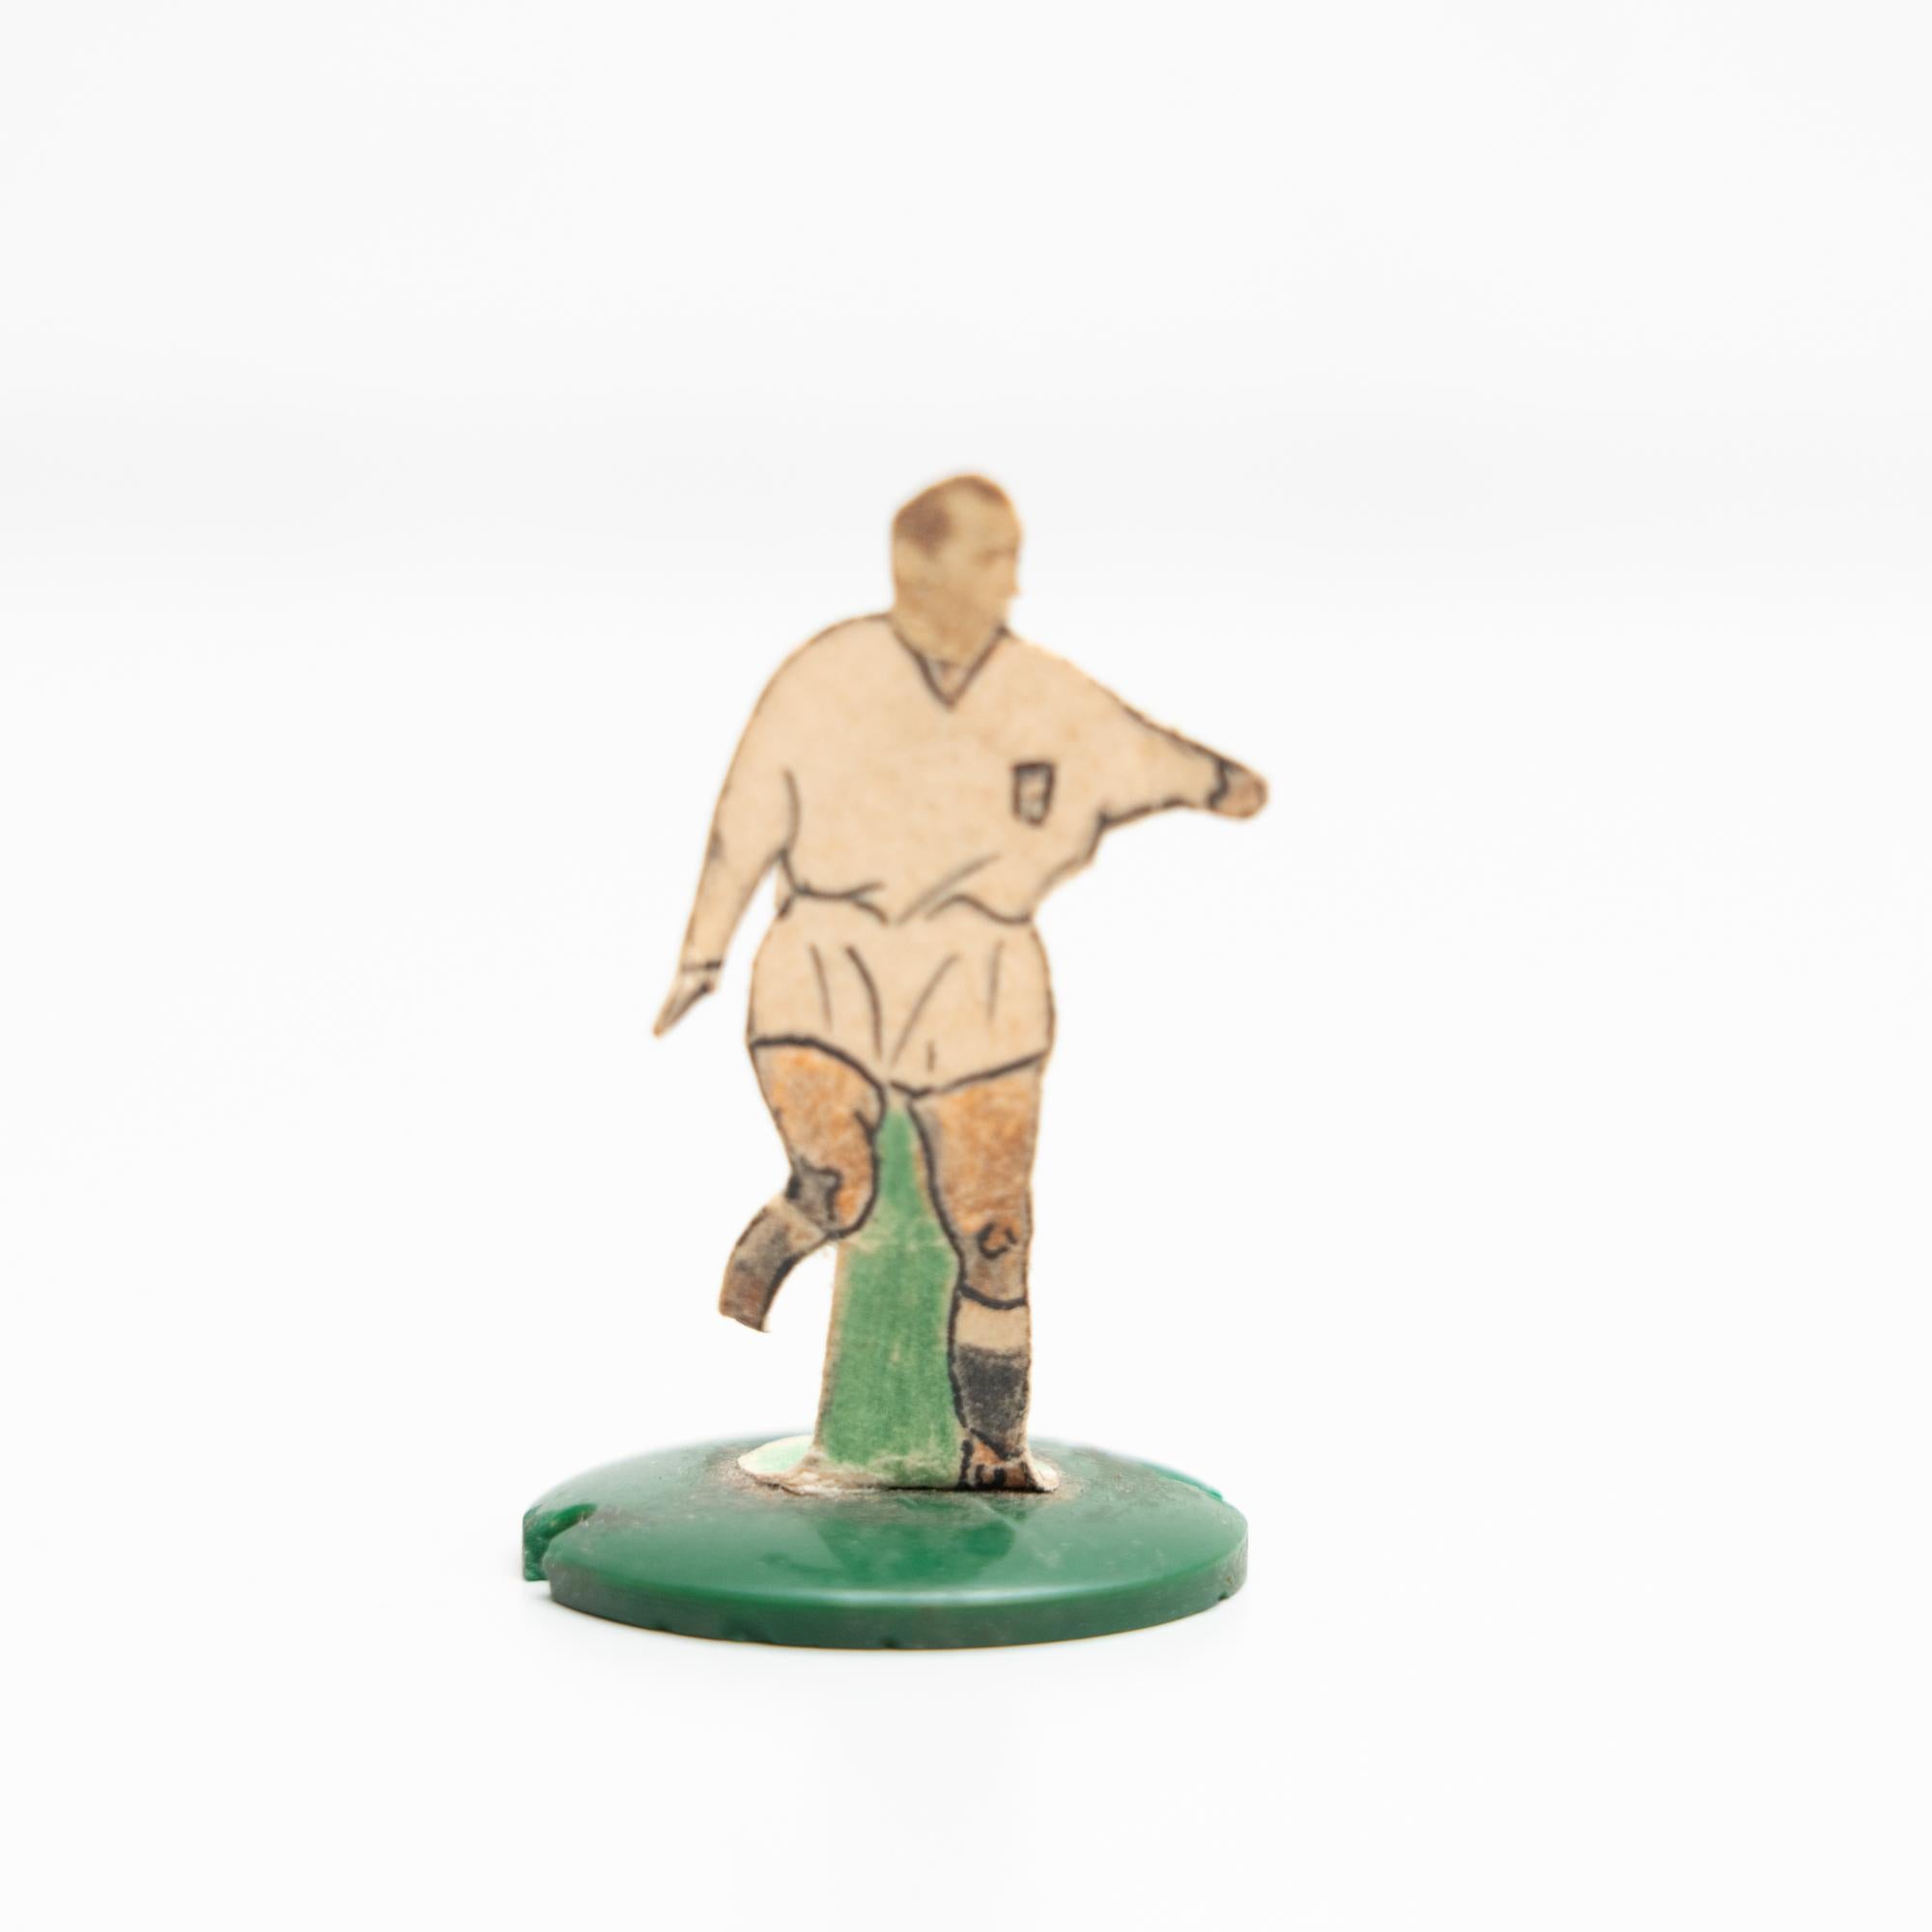 Paper Set of 6 Traditional Antique Button Soccer Game Figures, circa 1950 For Sale